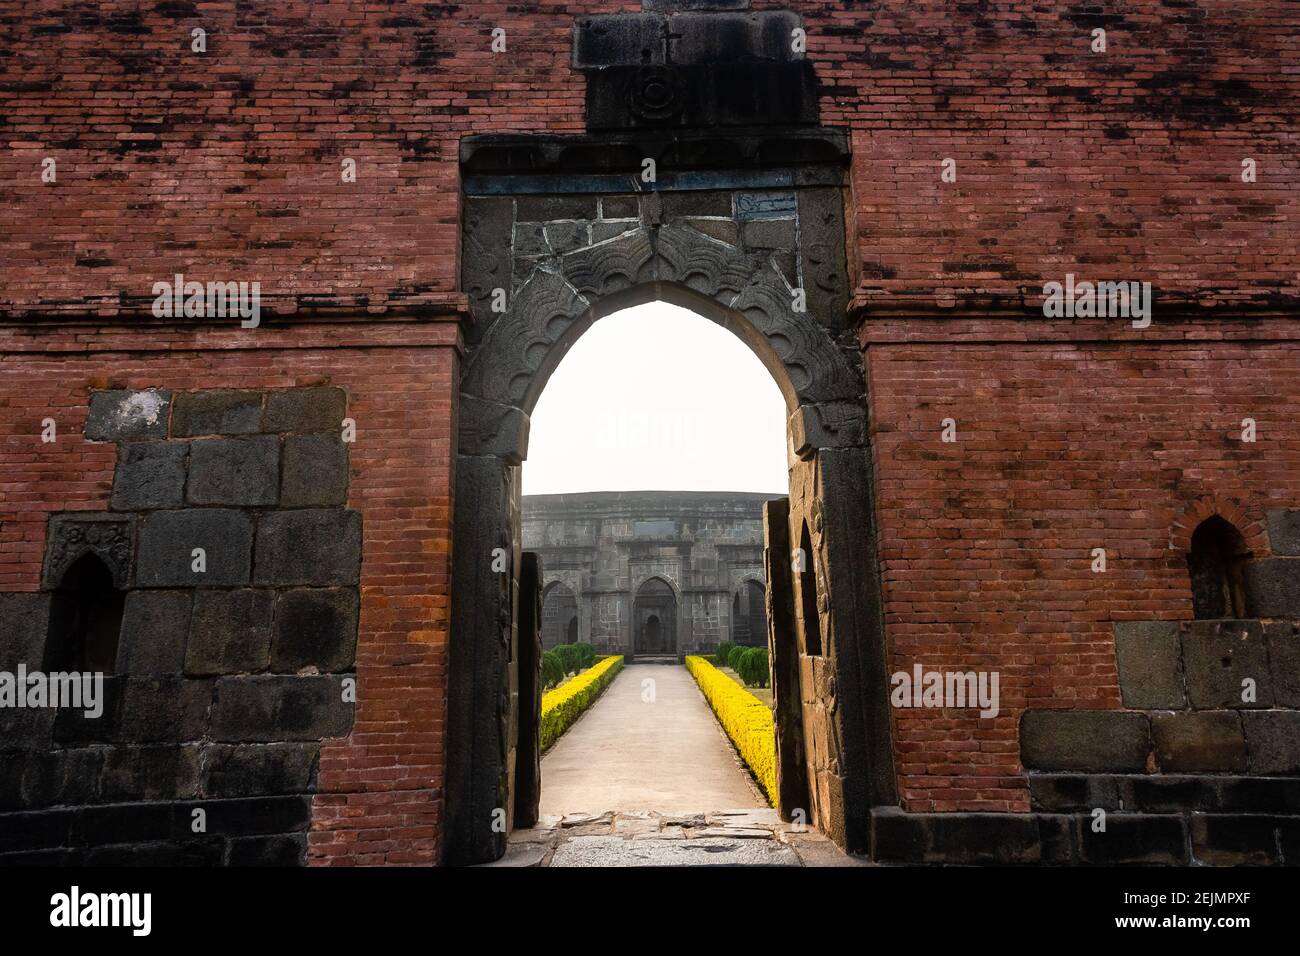 Malda, West Bengal, India - January 2018: The entrance gateway to the ruins of an ancient mosque in the village of Pandua in Malda. Stock Photo